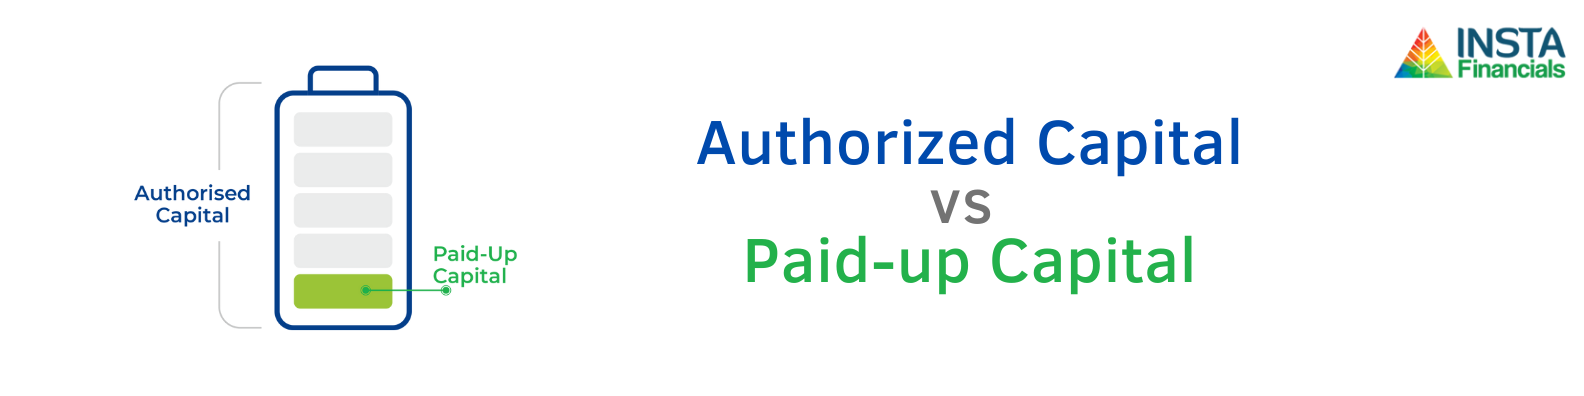 Difference between Authorised Capital and Paid-up Capital